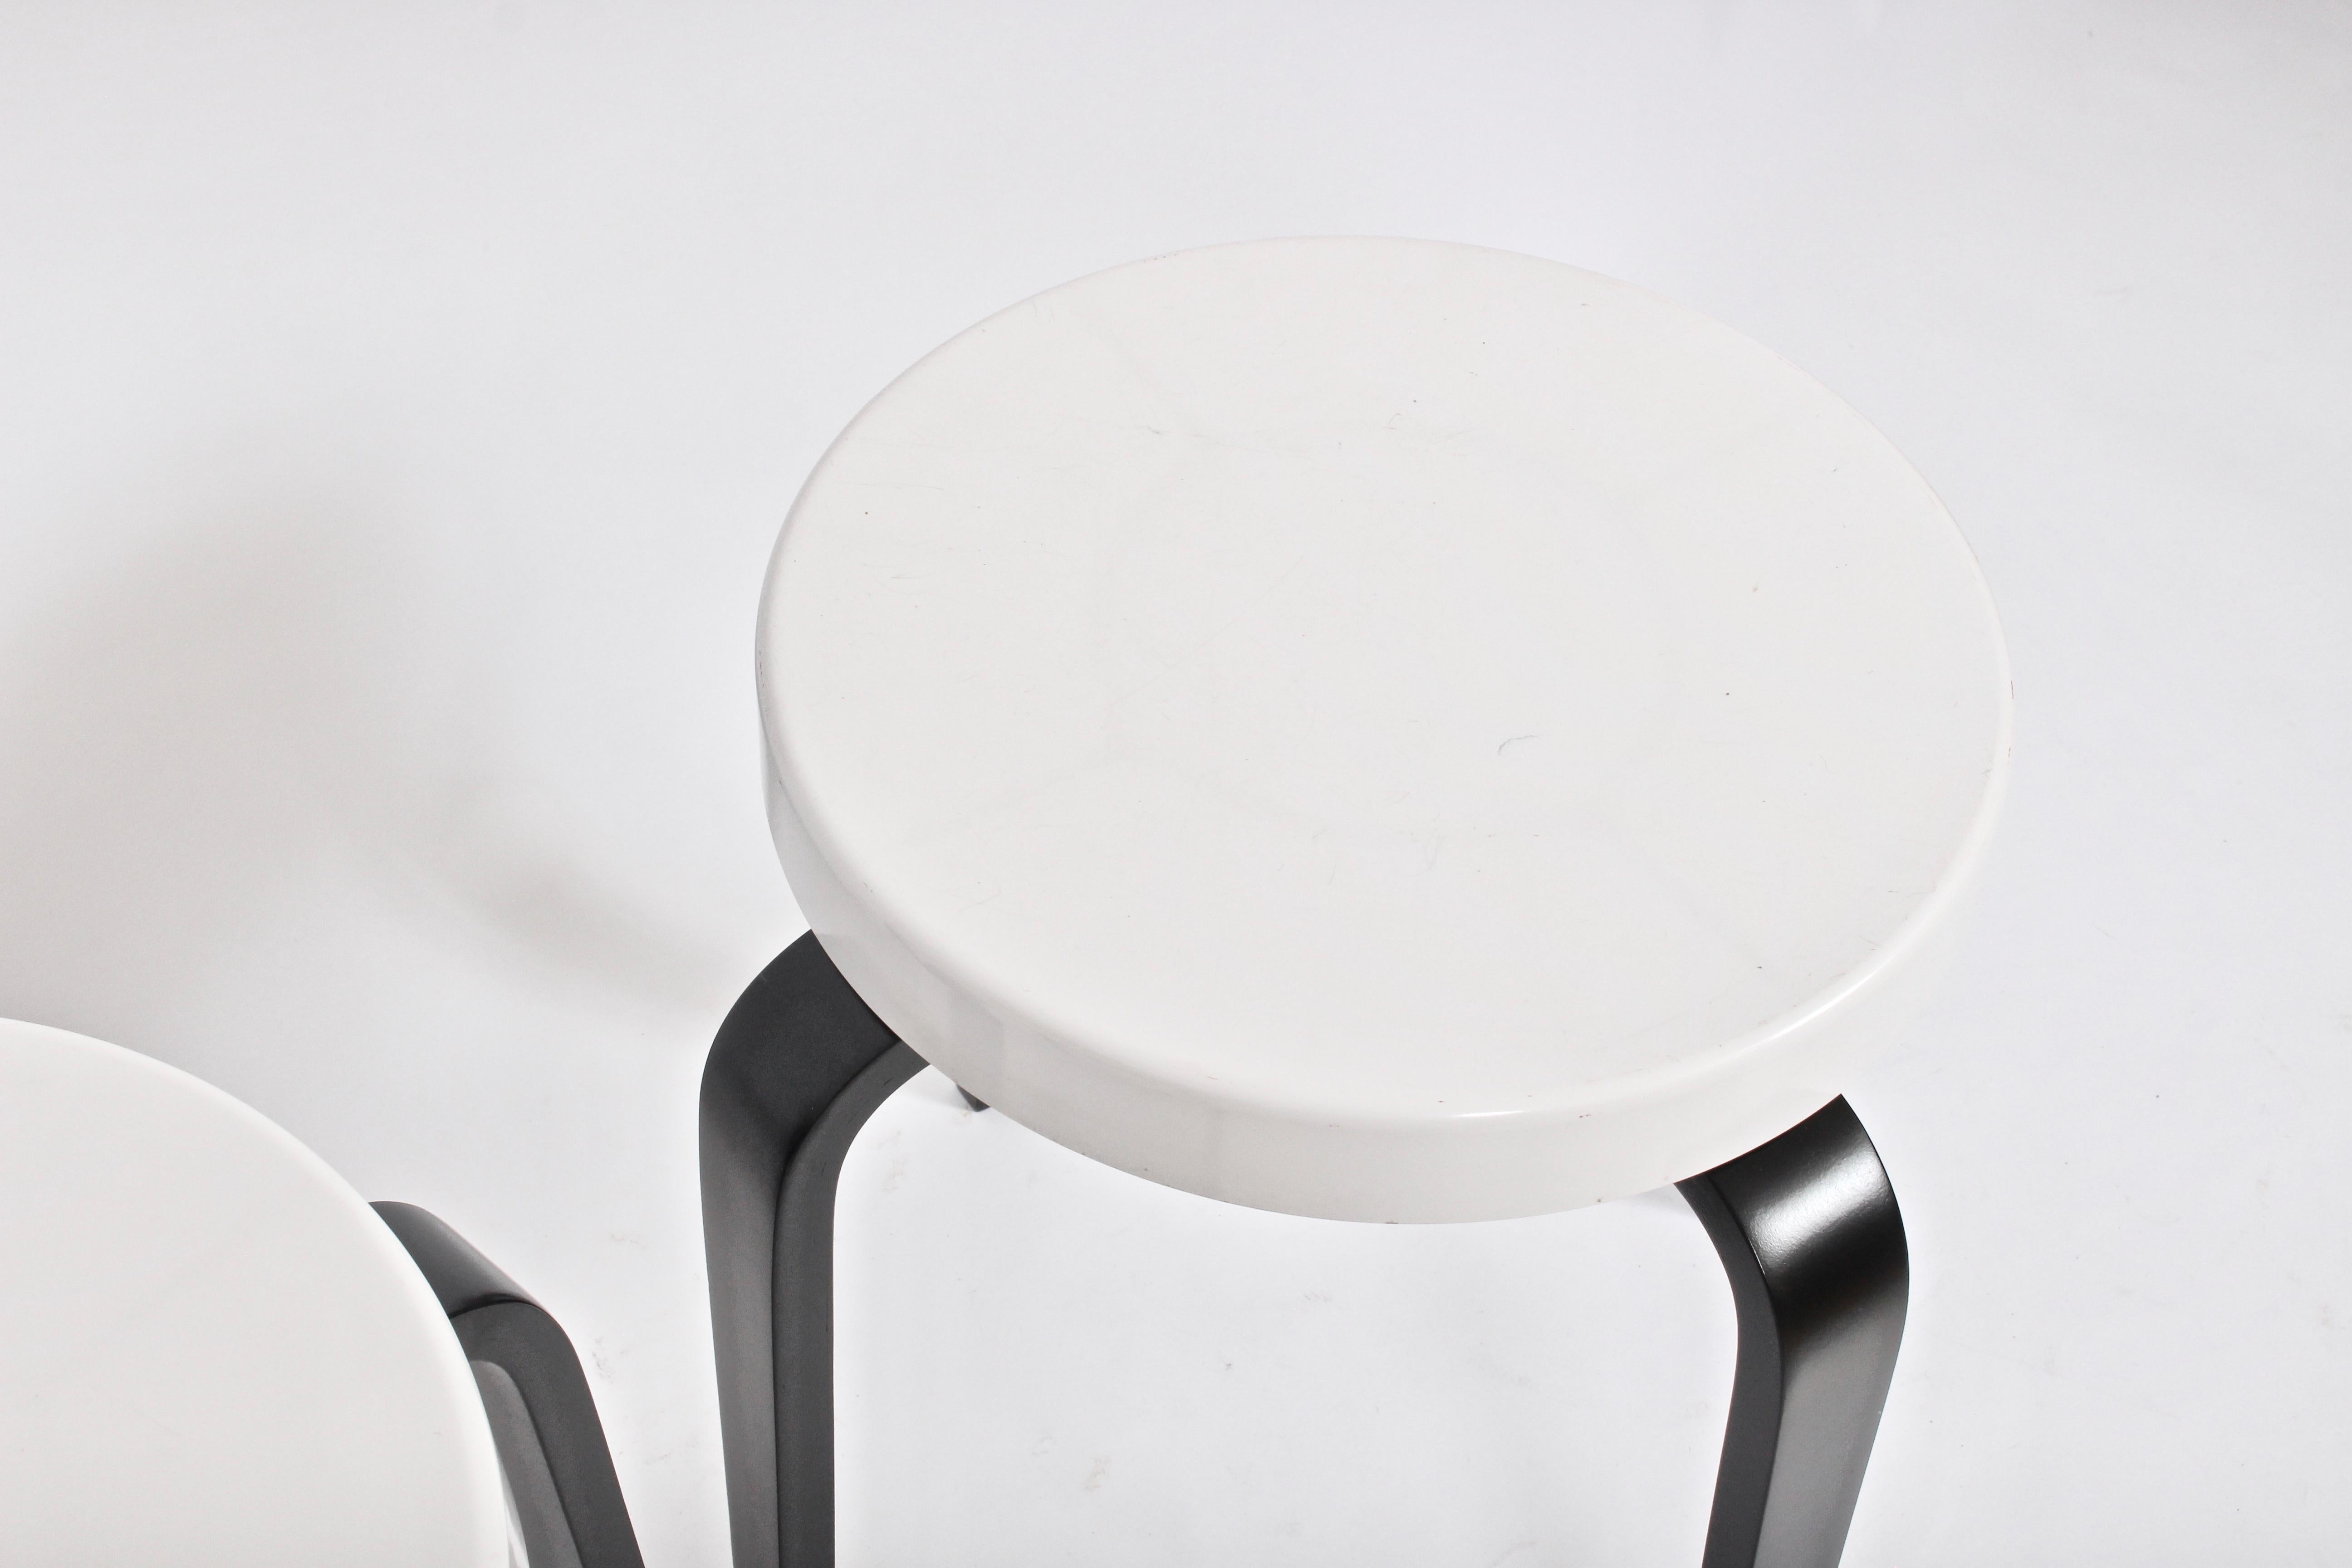 Pair of Thonet White and Black Bakelite Stacking Stools, 1930s In Good Condition For Sale In Bainbridge, NY